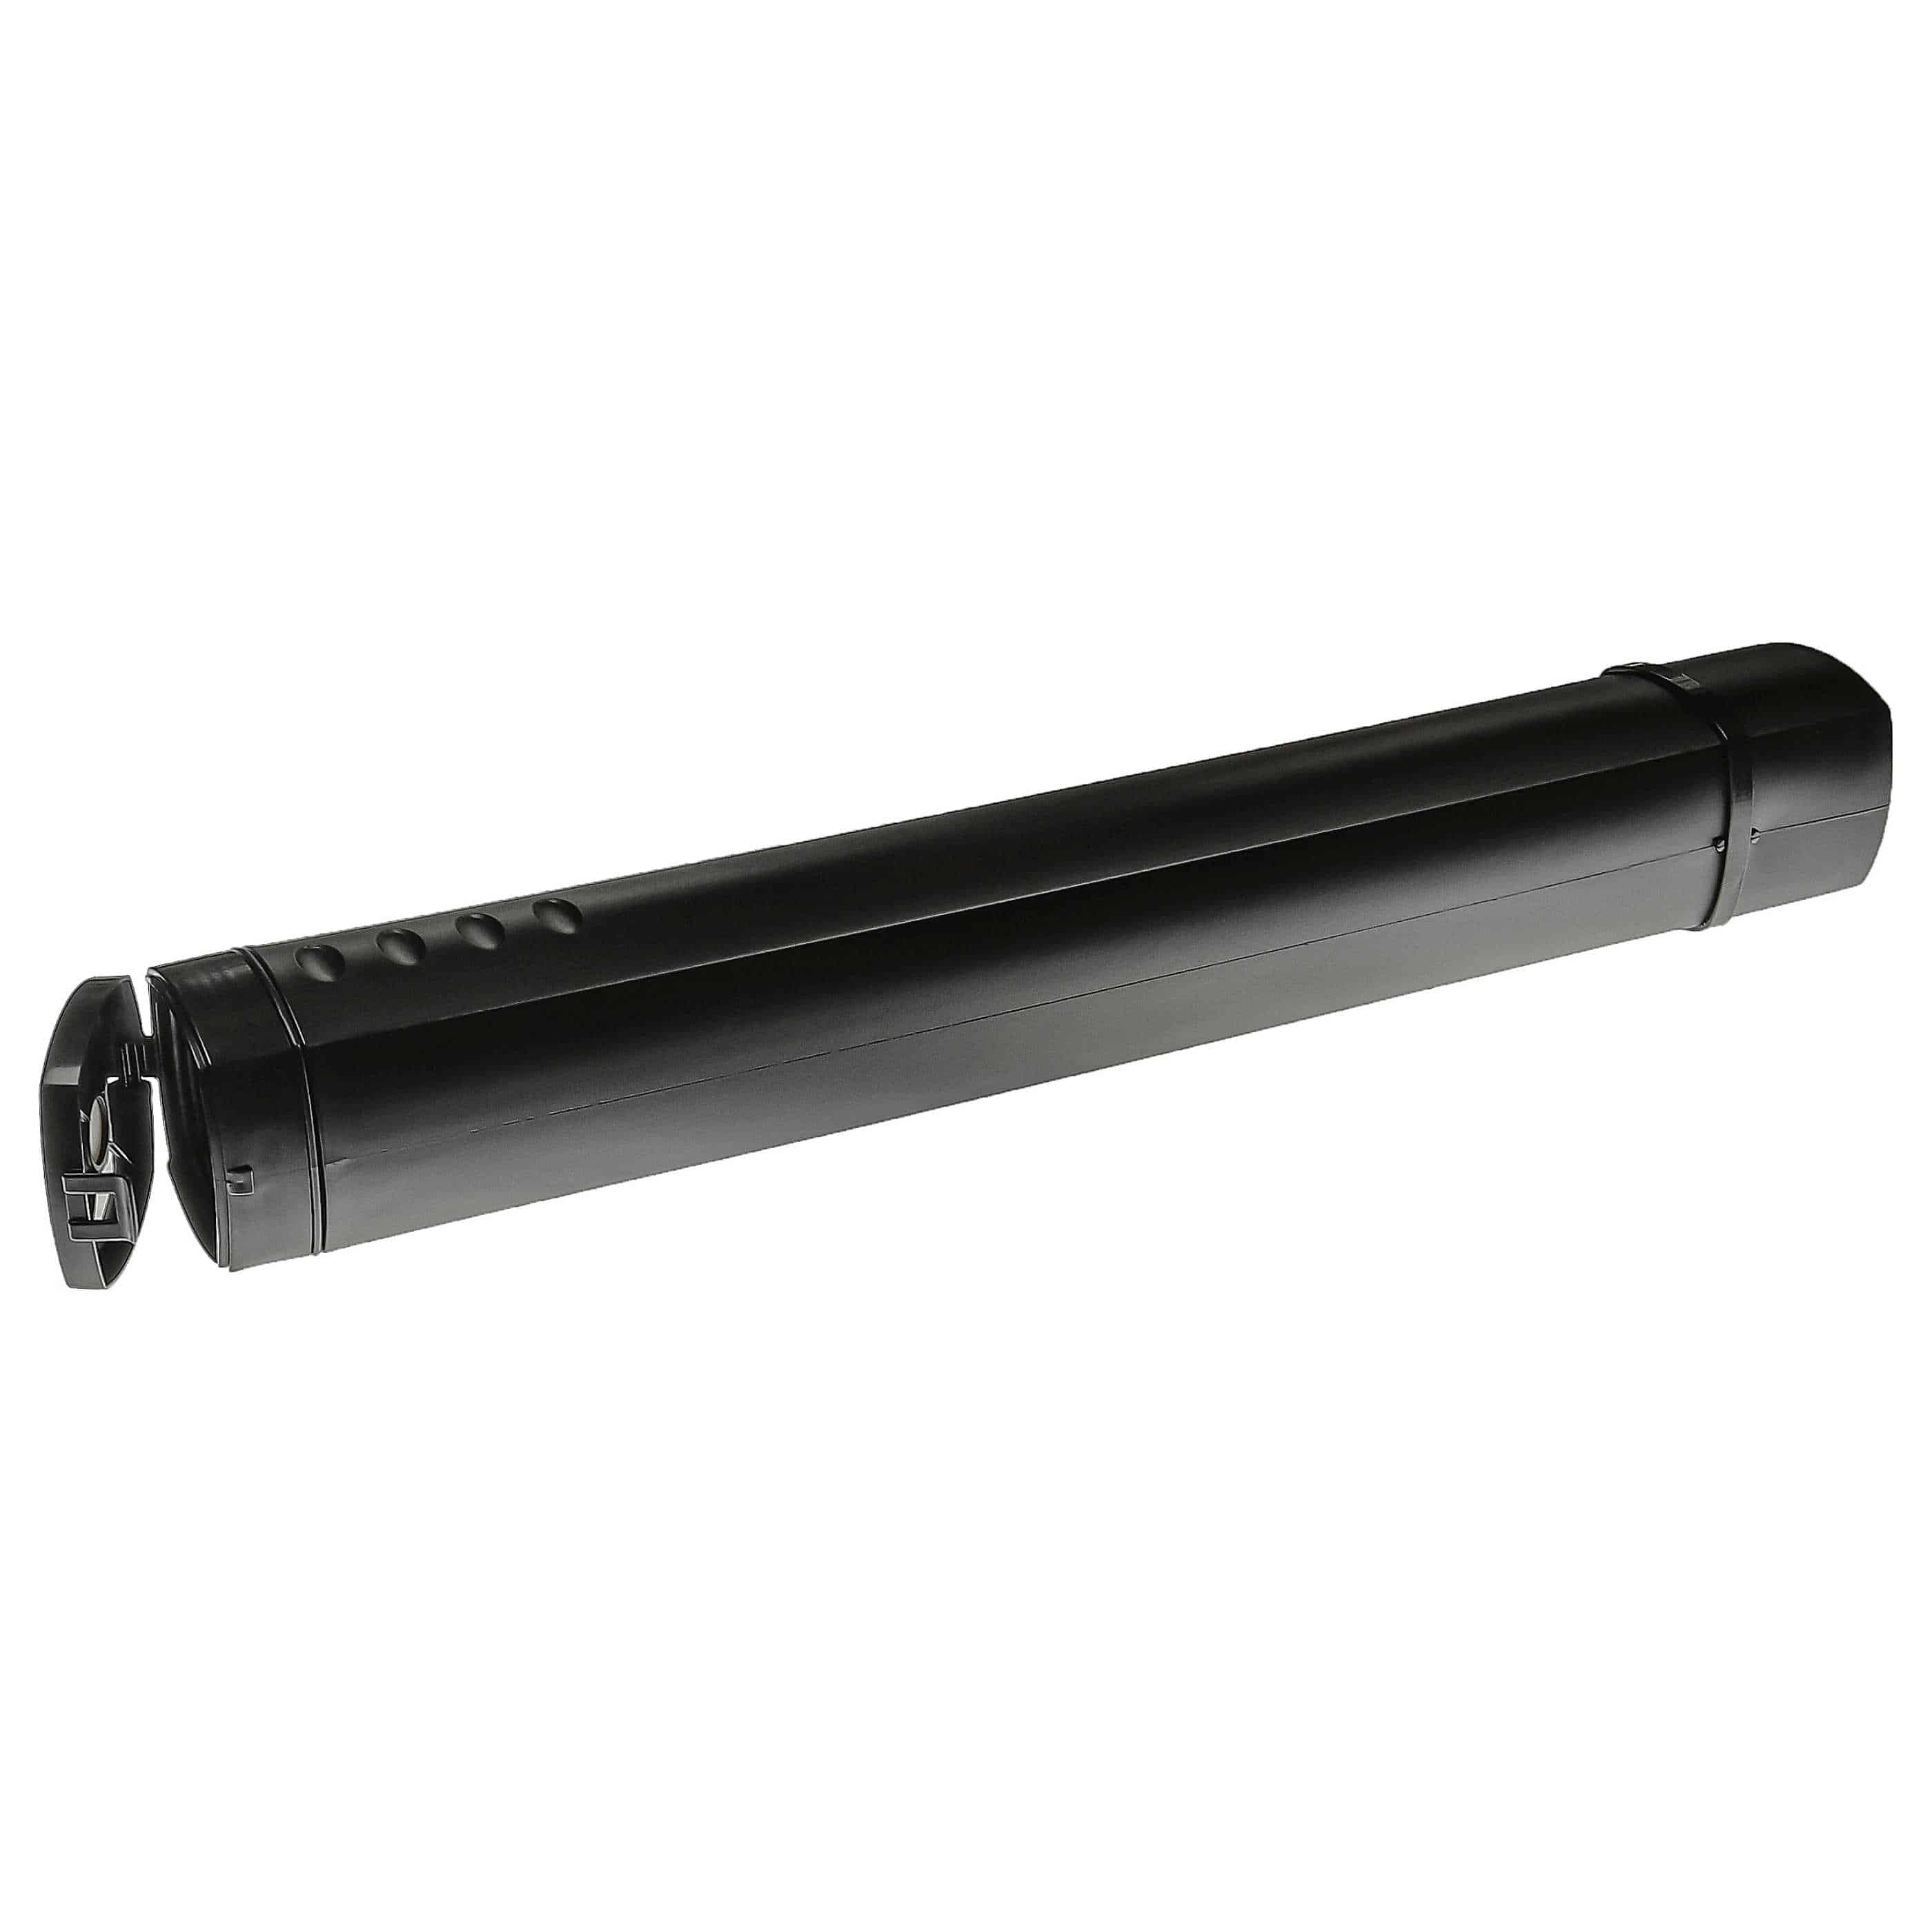 Transport Roll for Posters, Placards, Drawings, Documents - Holder, 63-102.8 cm, Ø 8.7 cm